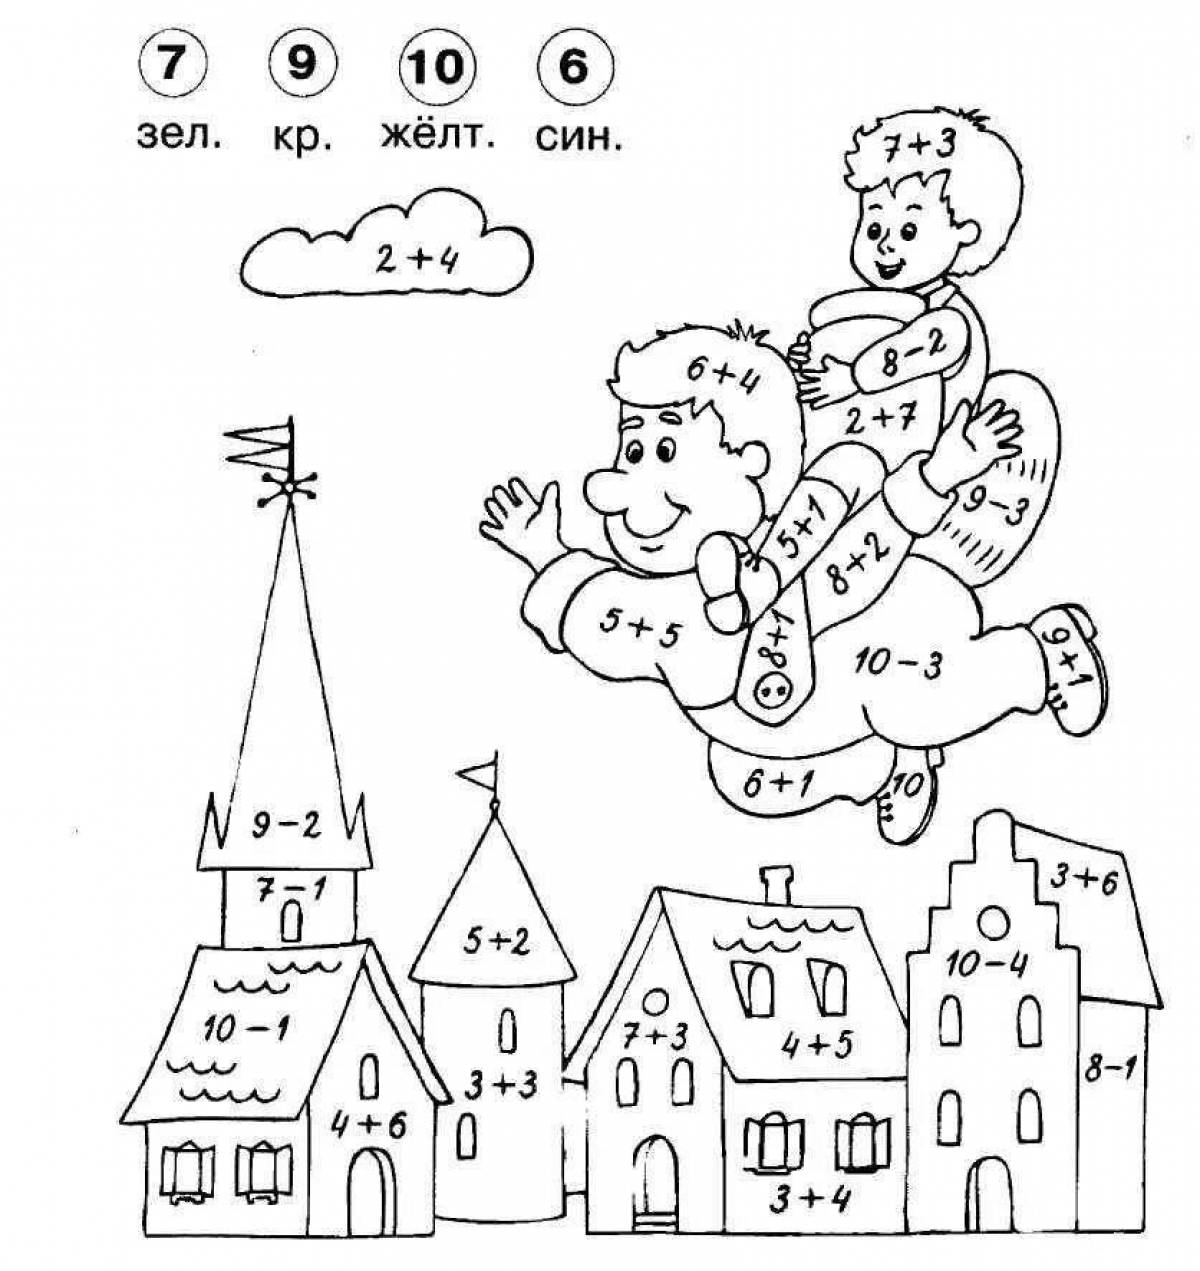 Interesting coloring book for math grade 2